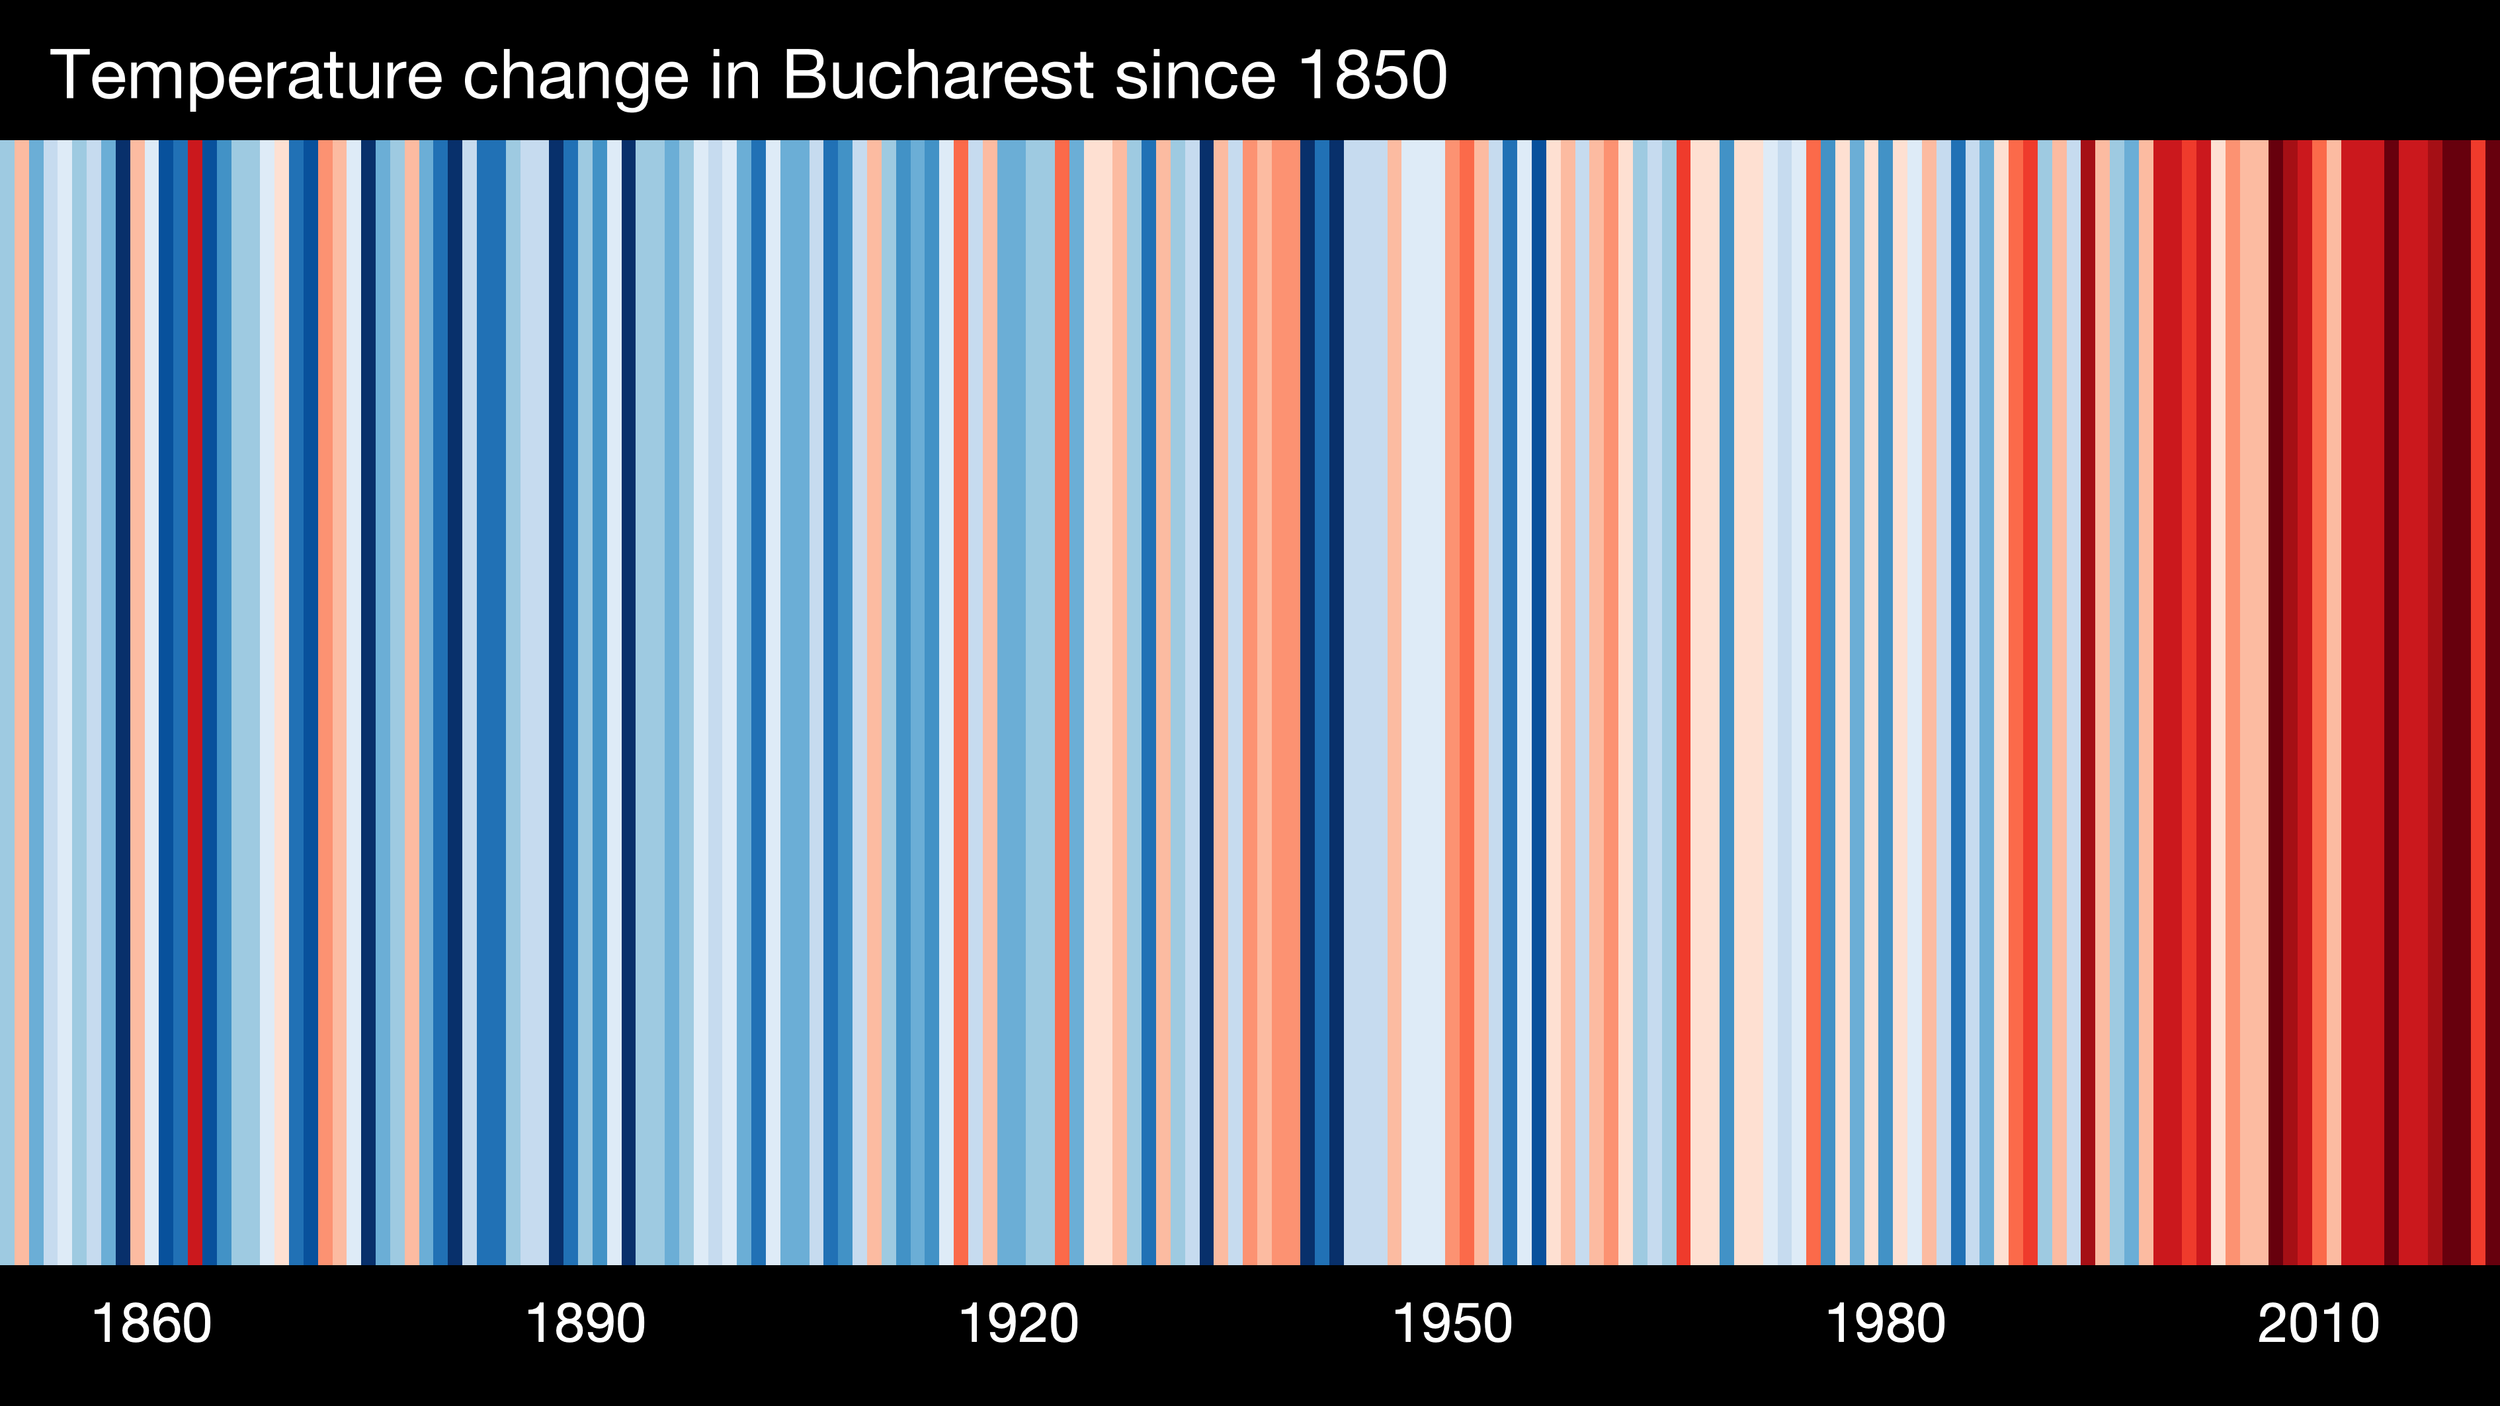 EUROPE-Romania-Bucharest-1850-2022-BK-withlabels.png